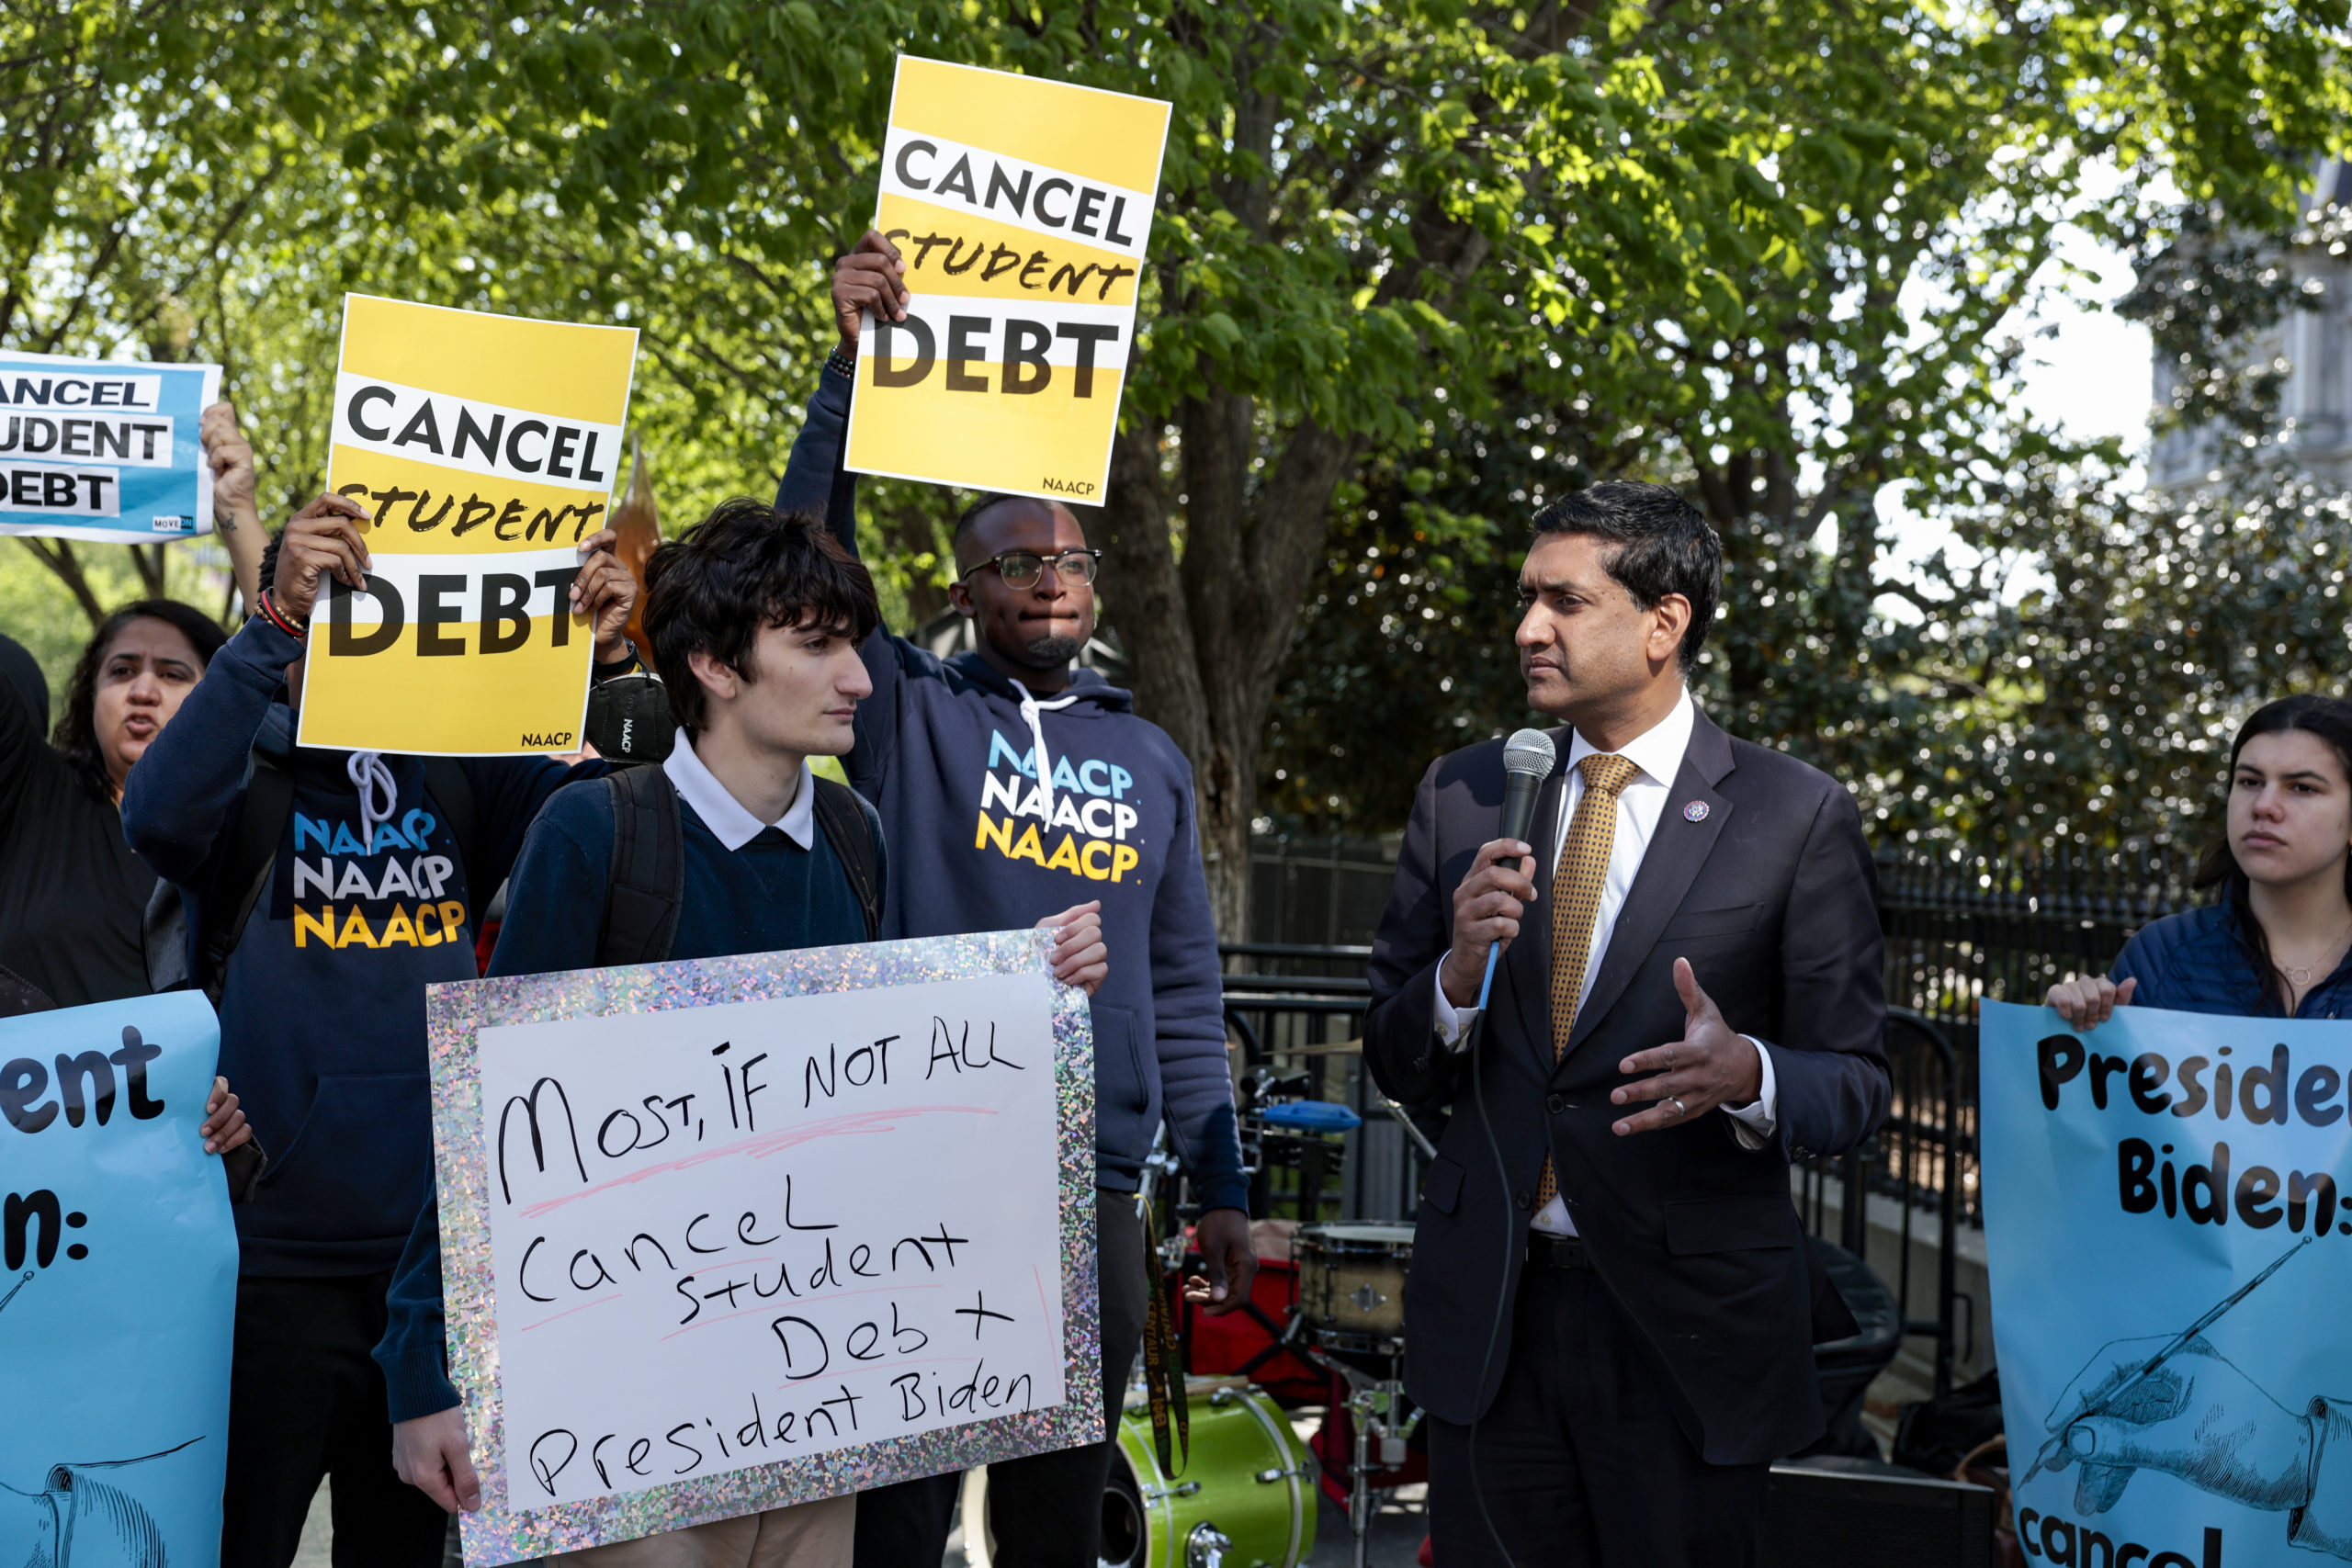 Rep. Ro Khanna (D-CA) speaks at a Student Loan Forgiveness rally on Pennsylvania Avenue and 17th street near the White House on April 27, 2022 in Washington, DC. Student loan activists including college students held the rally to celebrate U.S. President Joe Biden's extension of the pause on student loans and also urge him to sign an executive order that would fully cancel all student debt. (Photo by Anna Moneymaker/Getty Images)